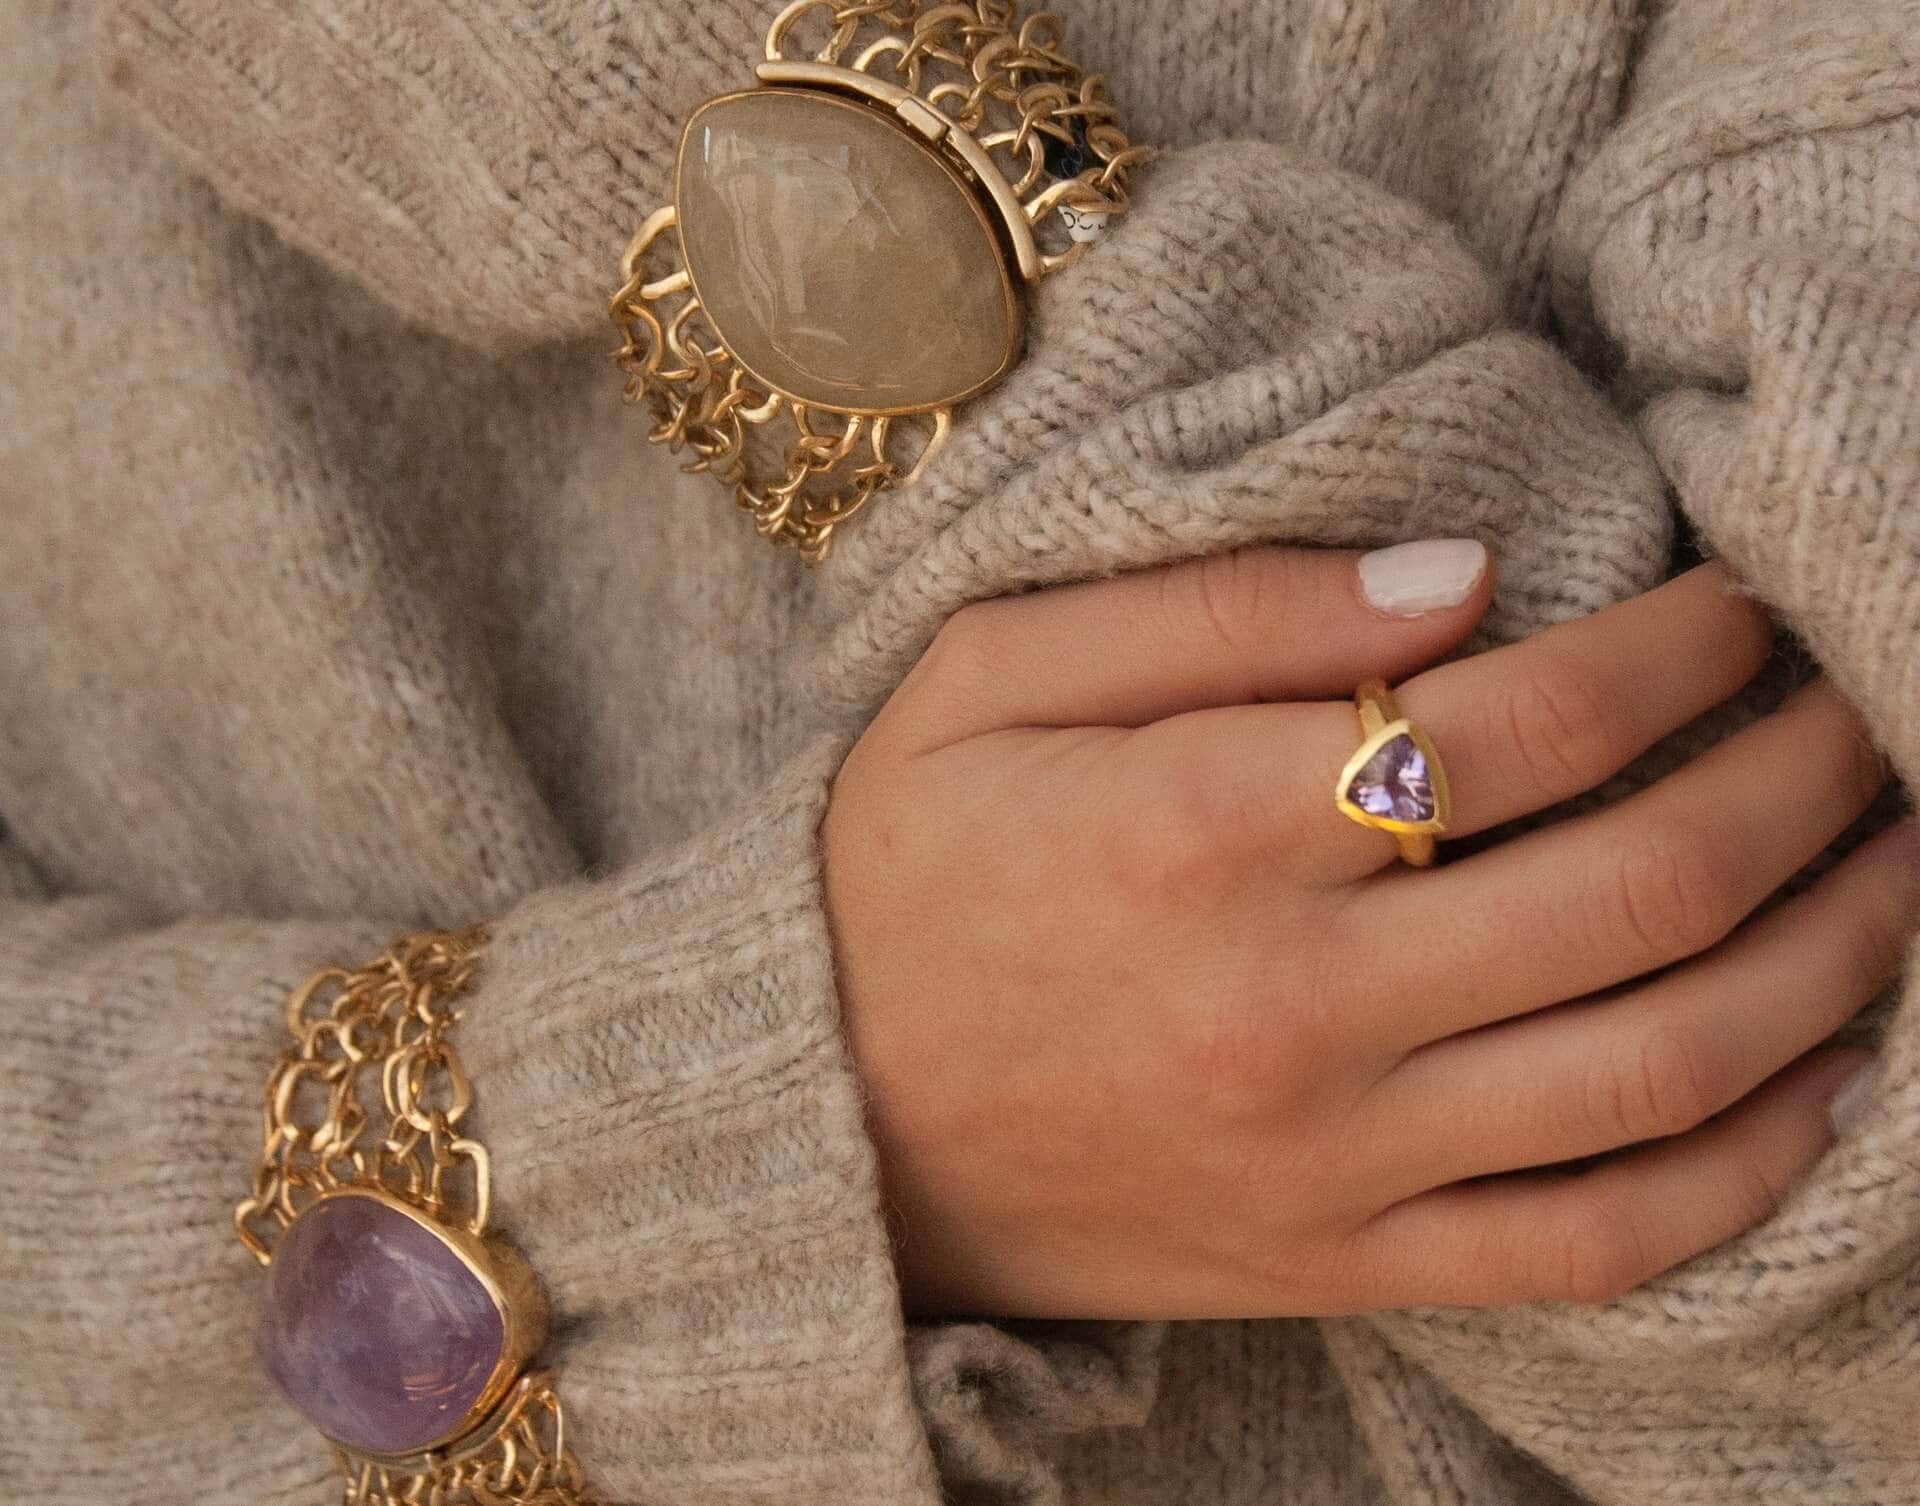 Clothes with jewellery embellishment – meet the winter style hit!